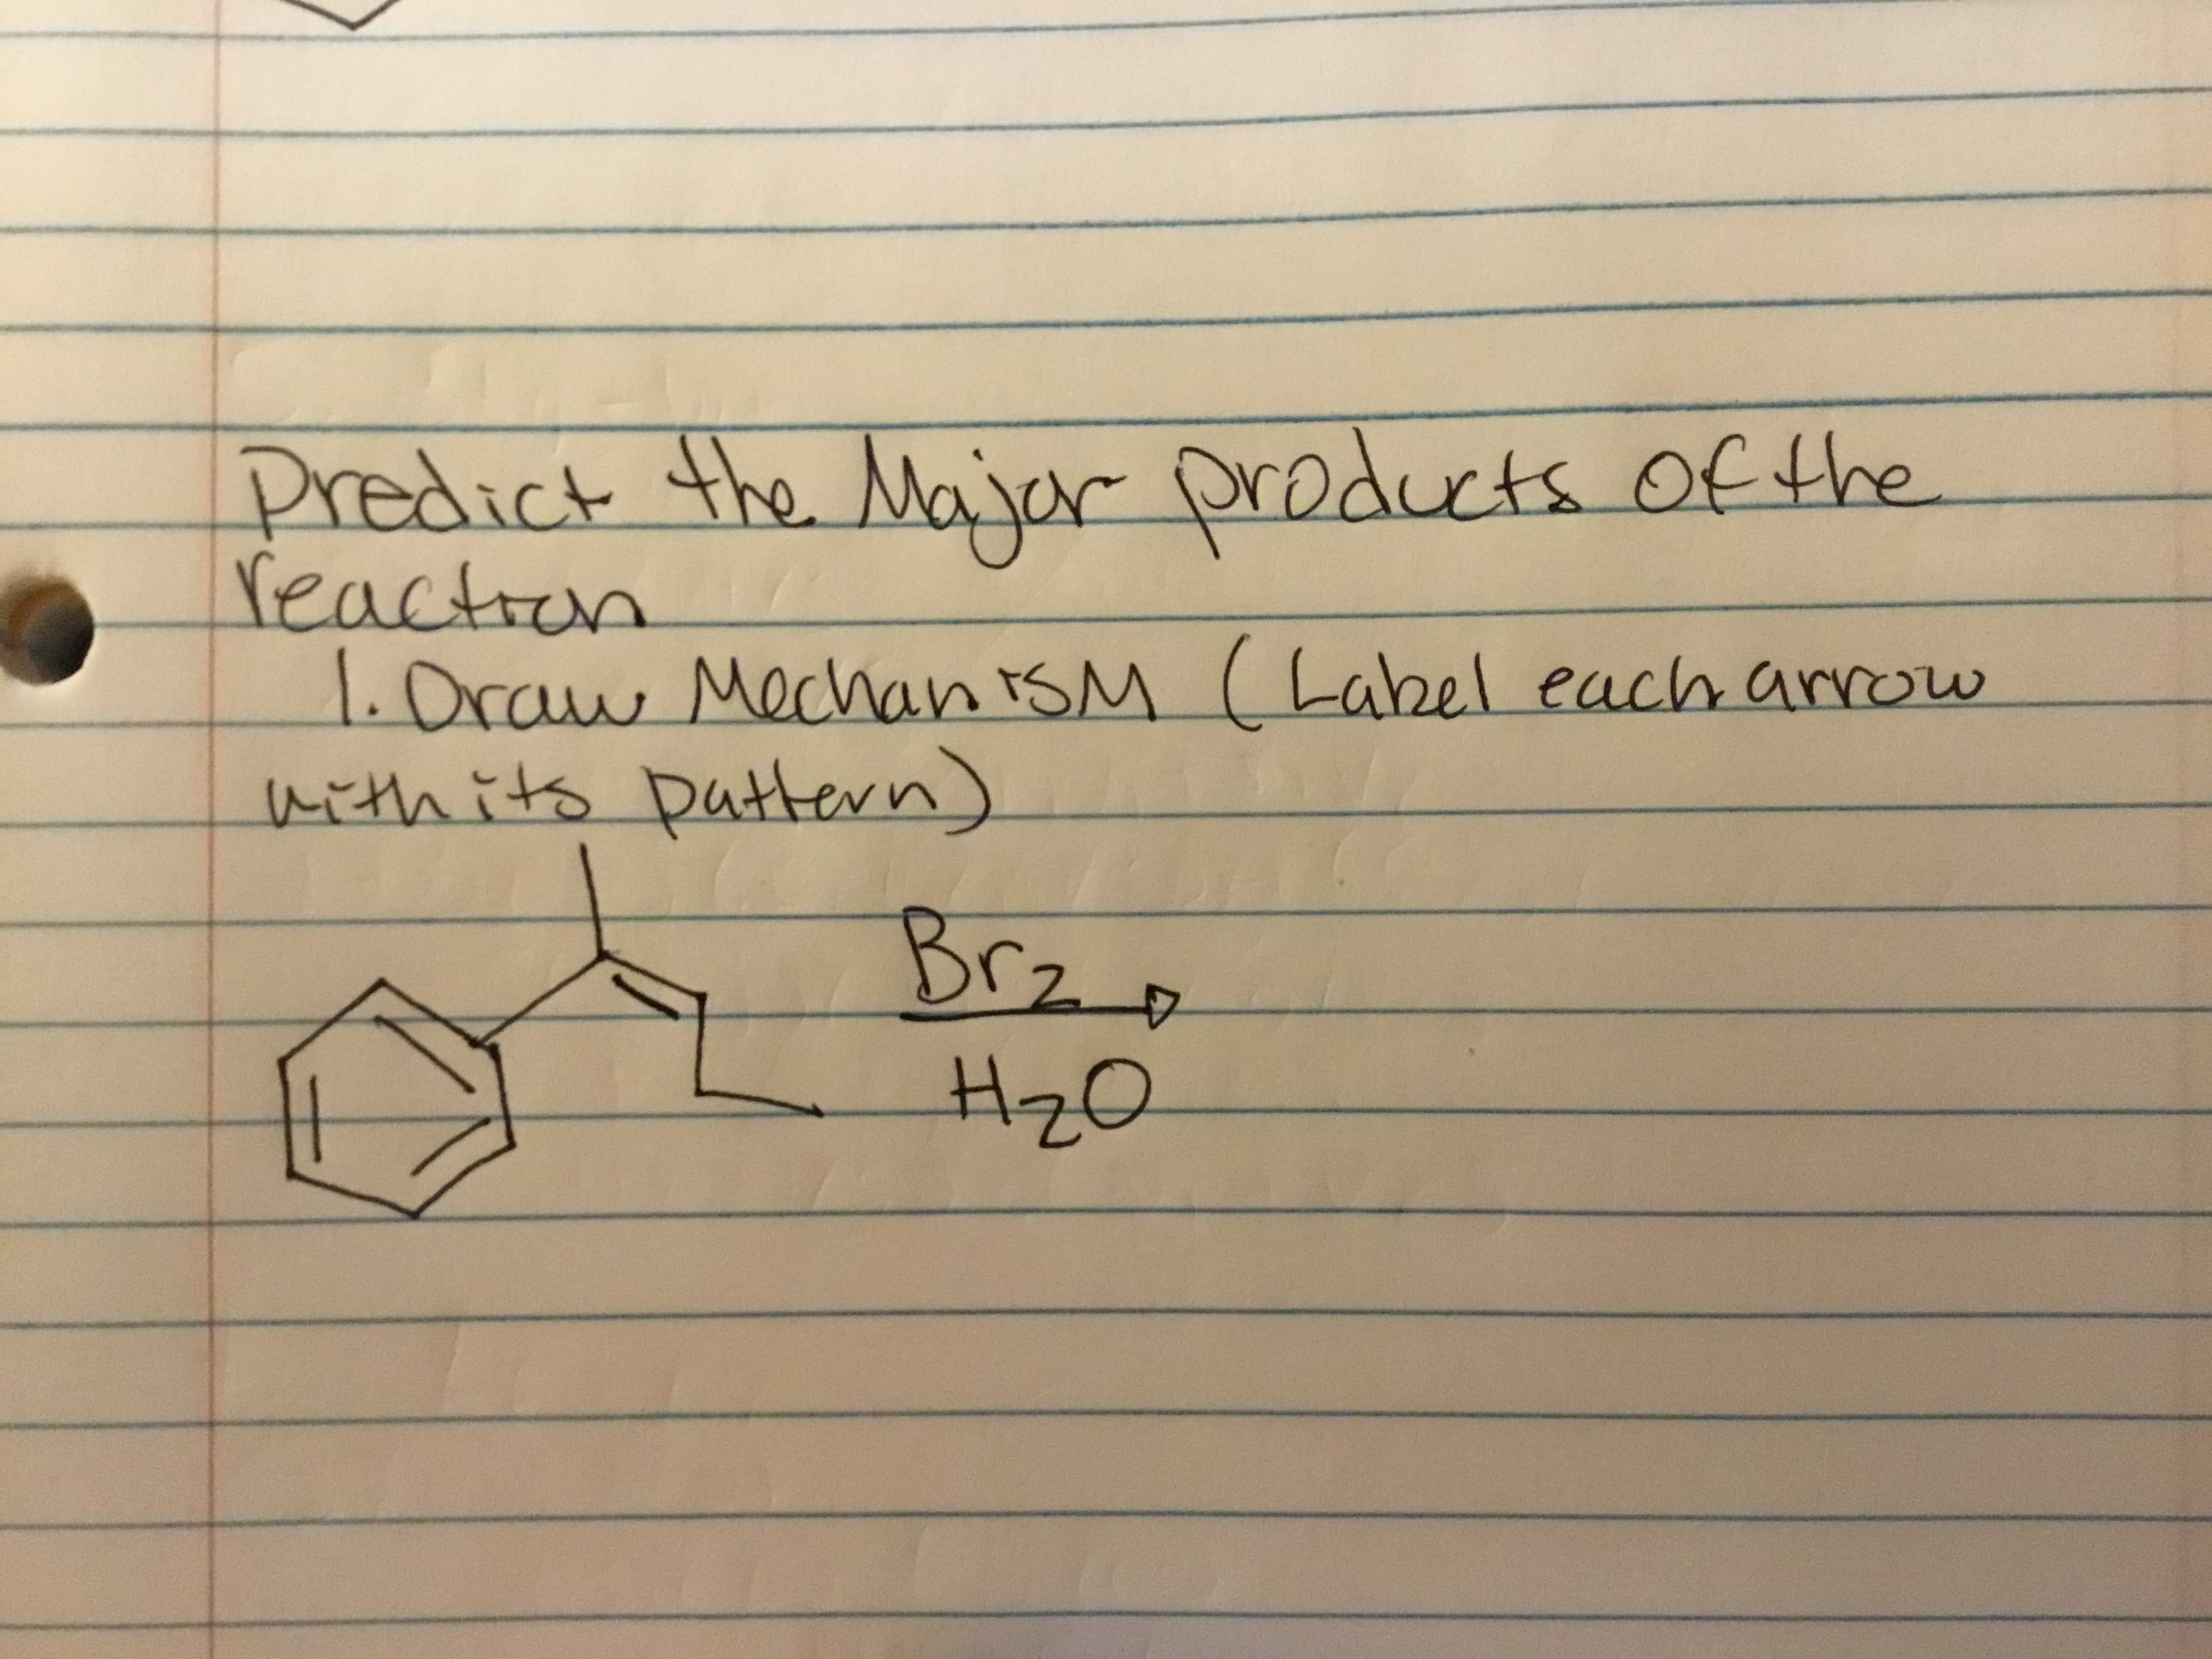 Predict the Majar products of the
reaction
1.Oraw MechanisM ( Label each arrow
with its Dattern)
Brz
H20
